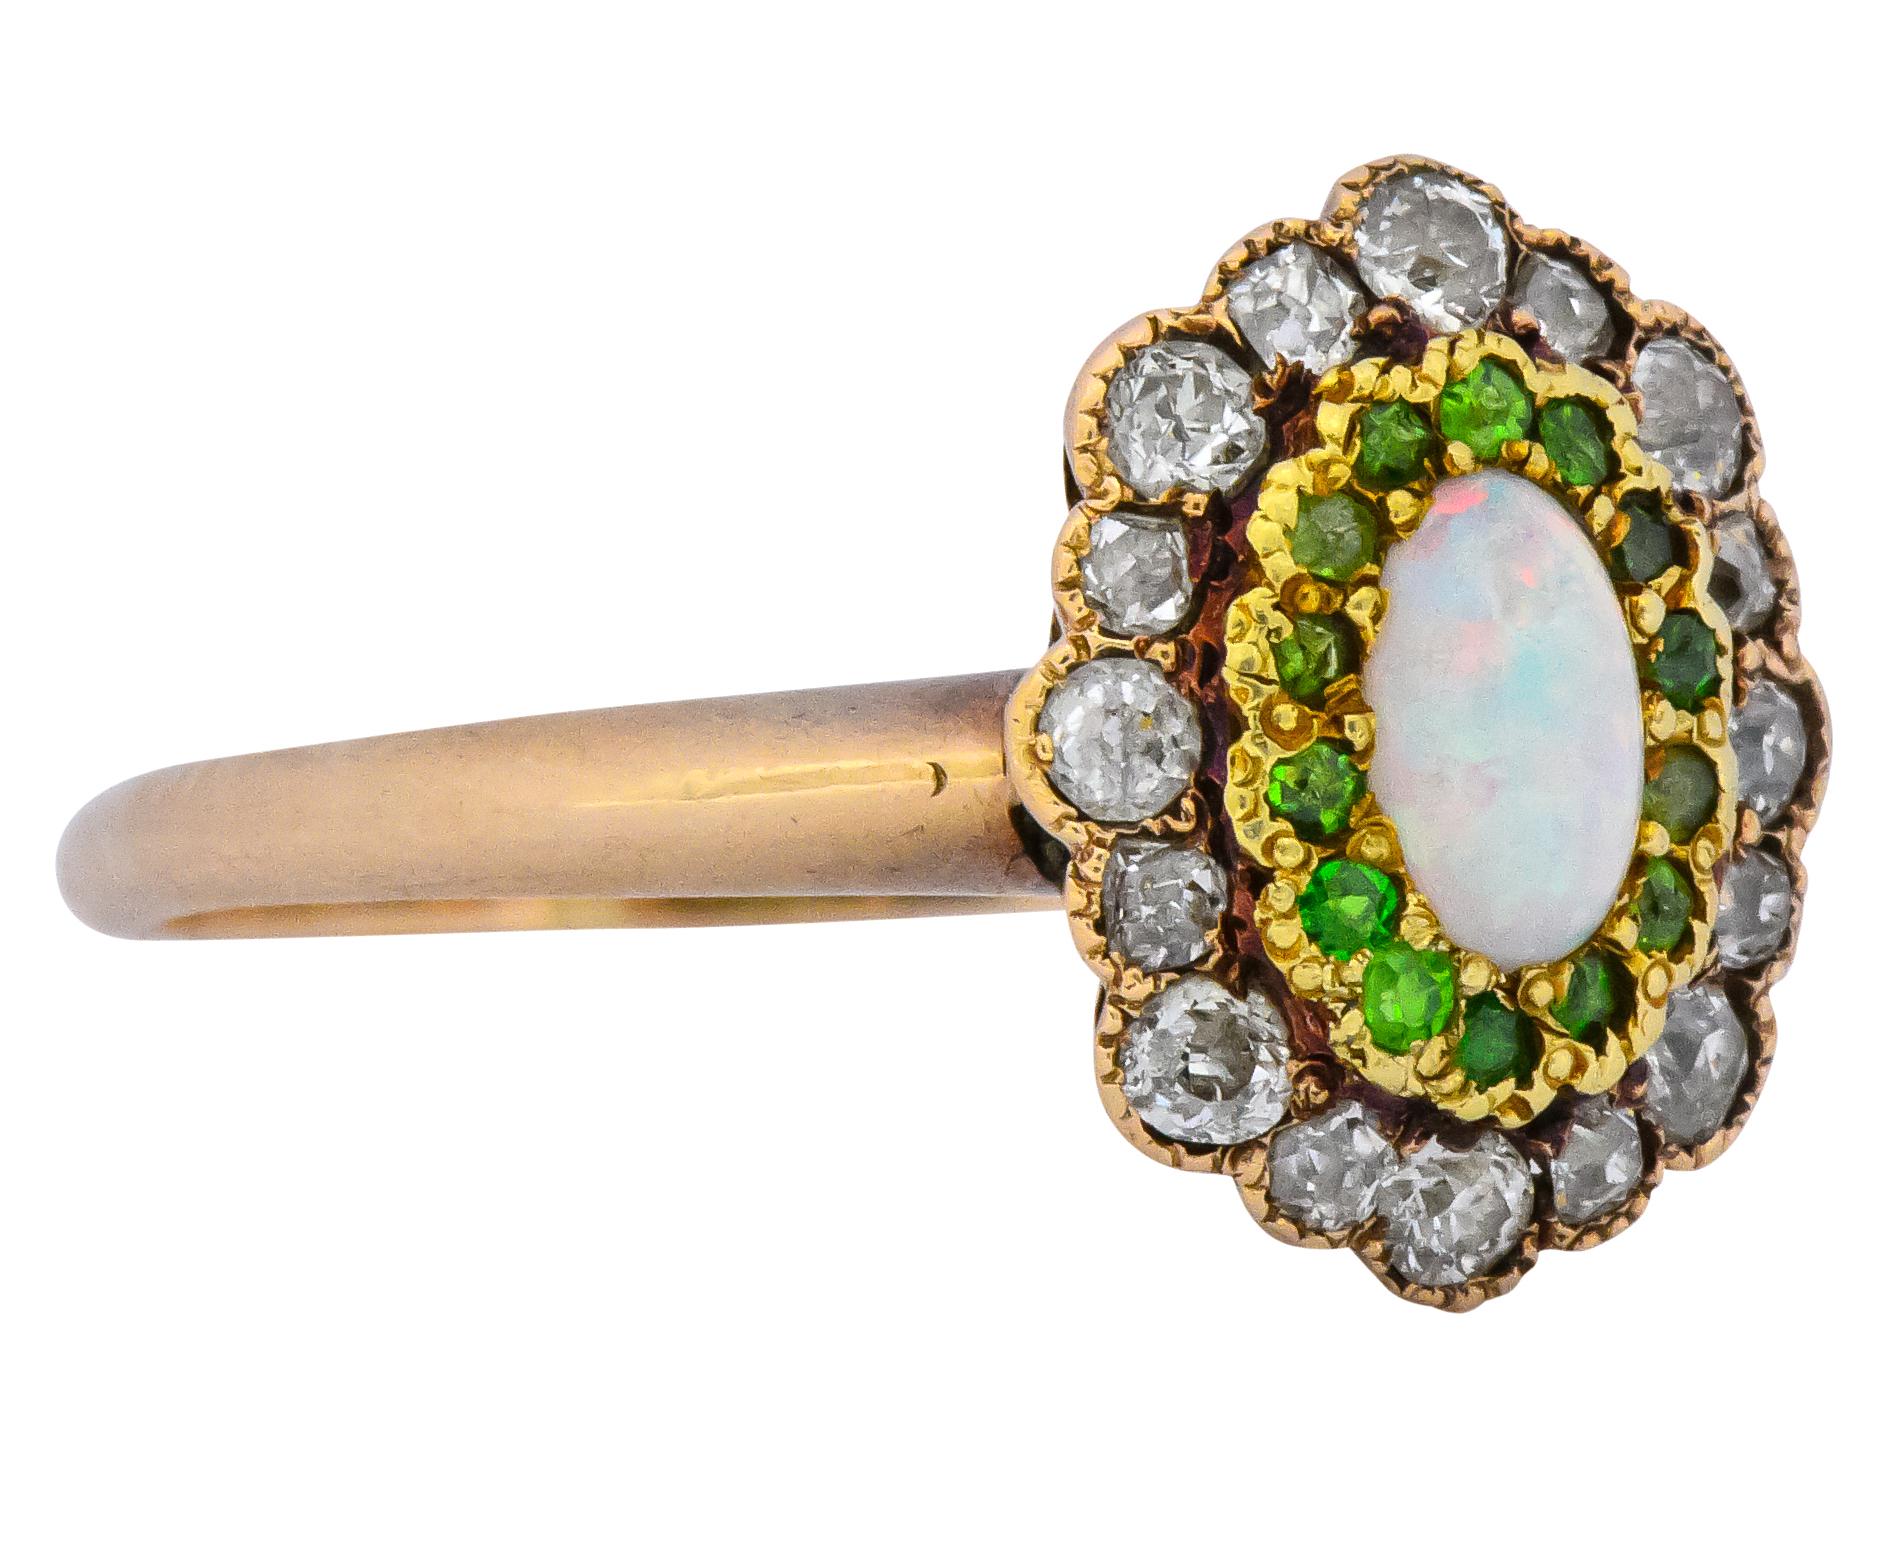 Cluster style ring centering a cabochon cut white opal measuring approximately 6.0 x 4.0 mm

Translucent and excellent play-of-color with flashes of red, yellow, green, and blue

Accented by Swiss cut demantoid garnets set in bright yellow 14 karat